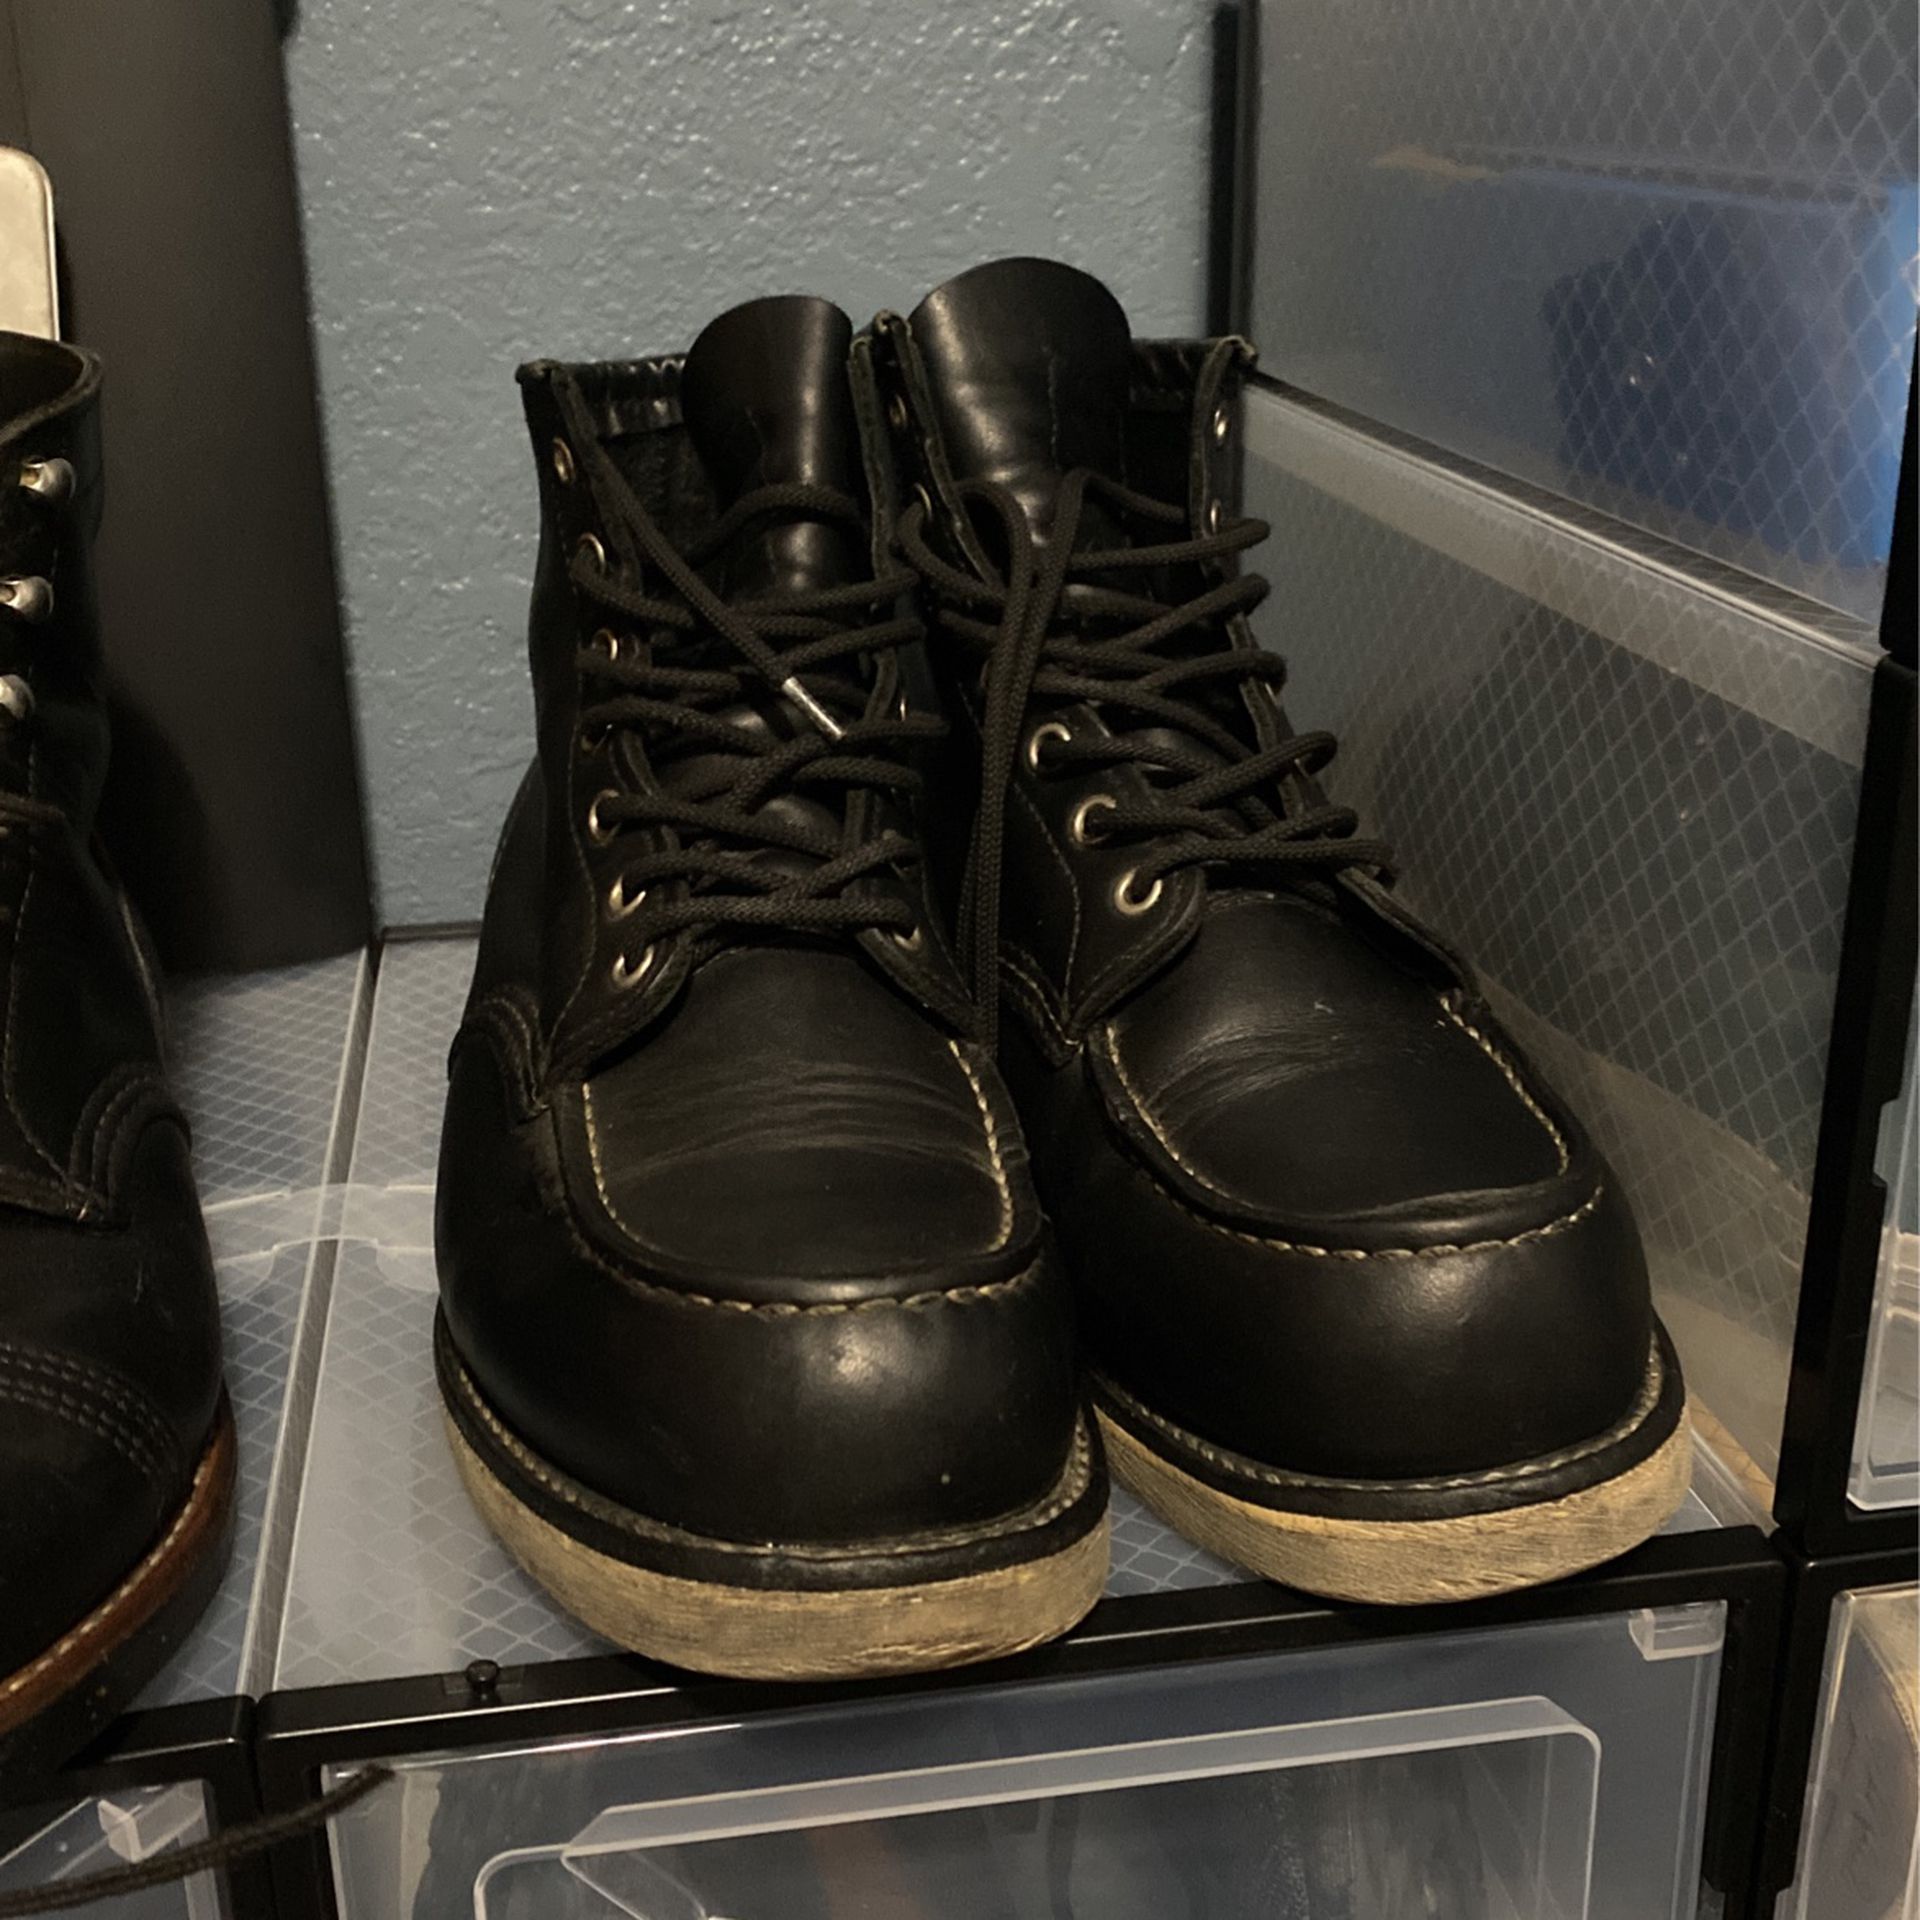 Redwing Size 10 Moctoe Boots